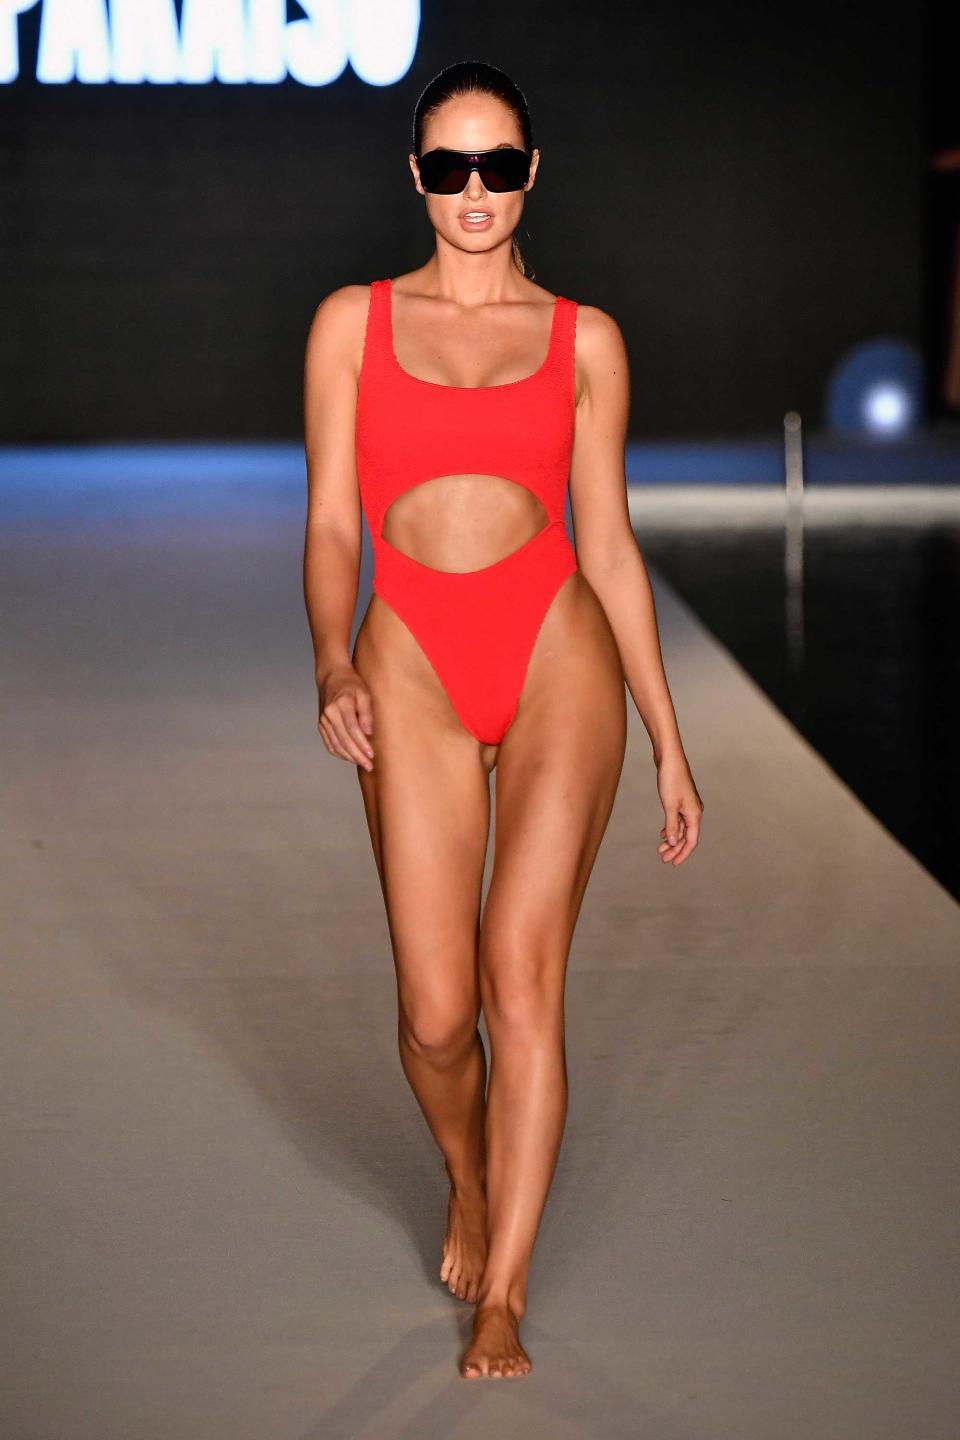 <p>A model walks the runway wearing a red cutout swimsuit for the 2018 <em>Sports Illustrated</em> swimsuit show during the Paraiso Fashion Fair in Miami at the W South Beach hotel on July 15. (Photo: Alexander Tamargo/Getty Images for Sports Illustrated) </p>